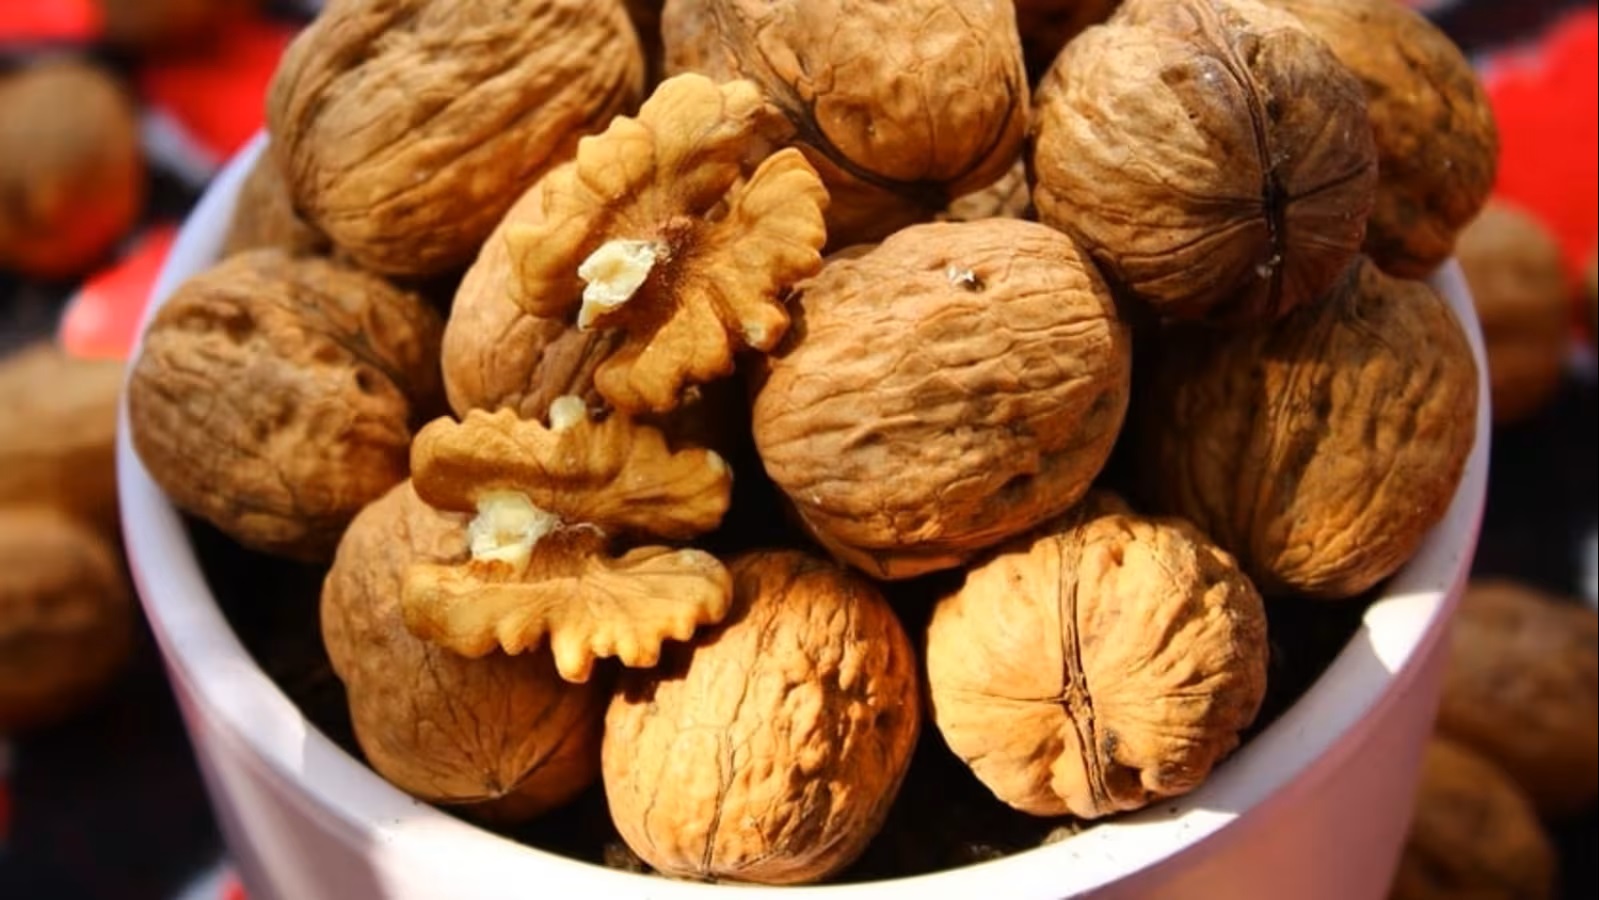 how-to-eat-walnuts-for-weight-loss